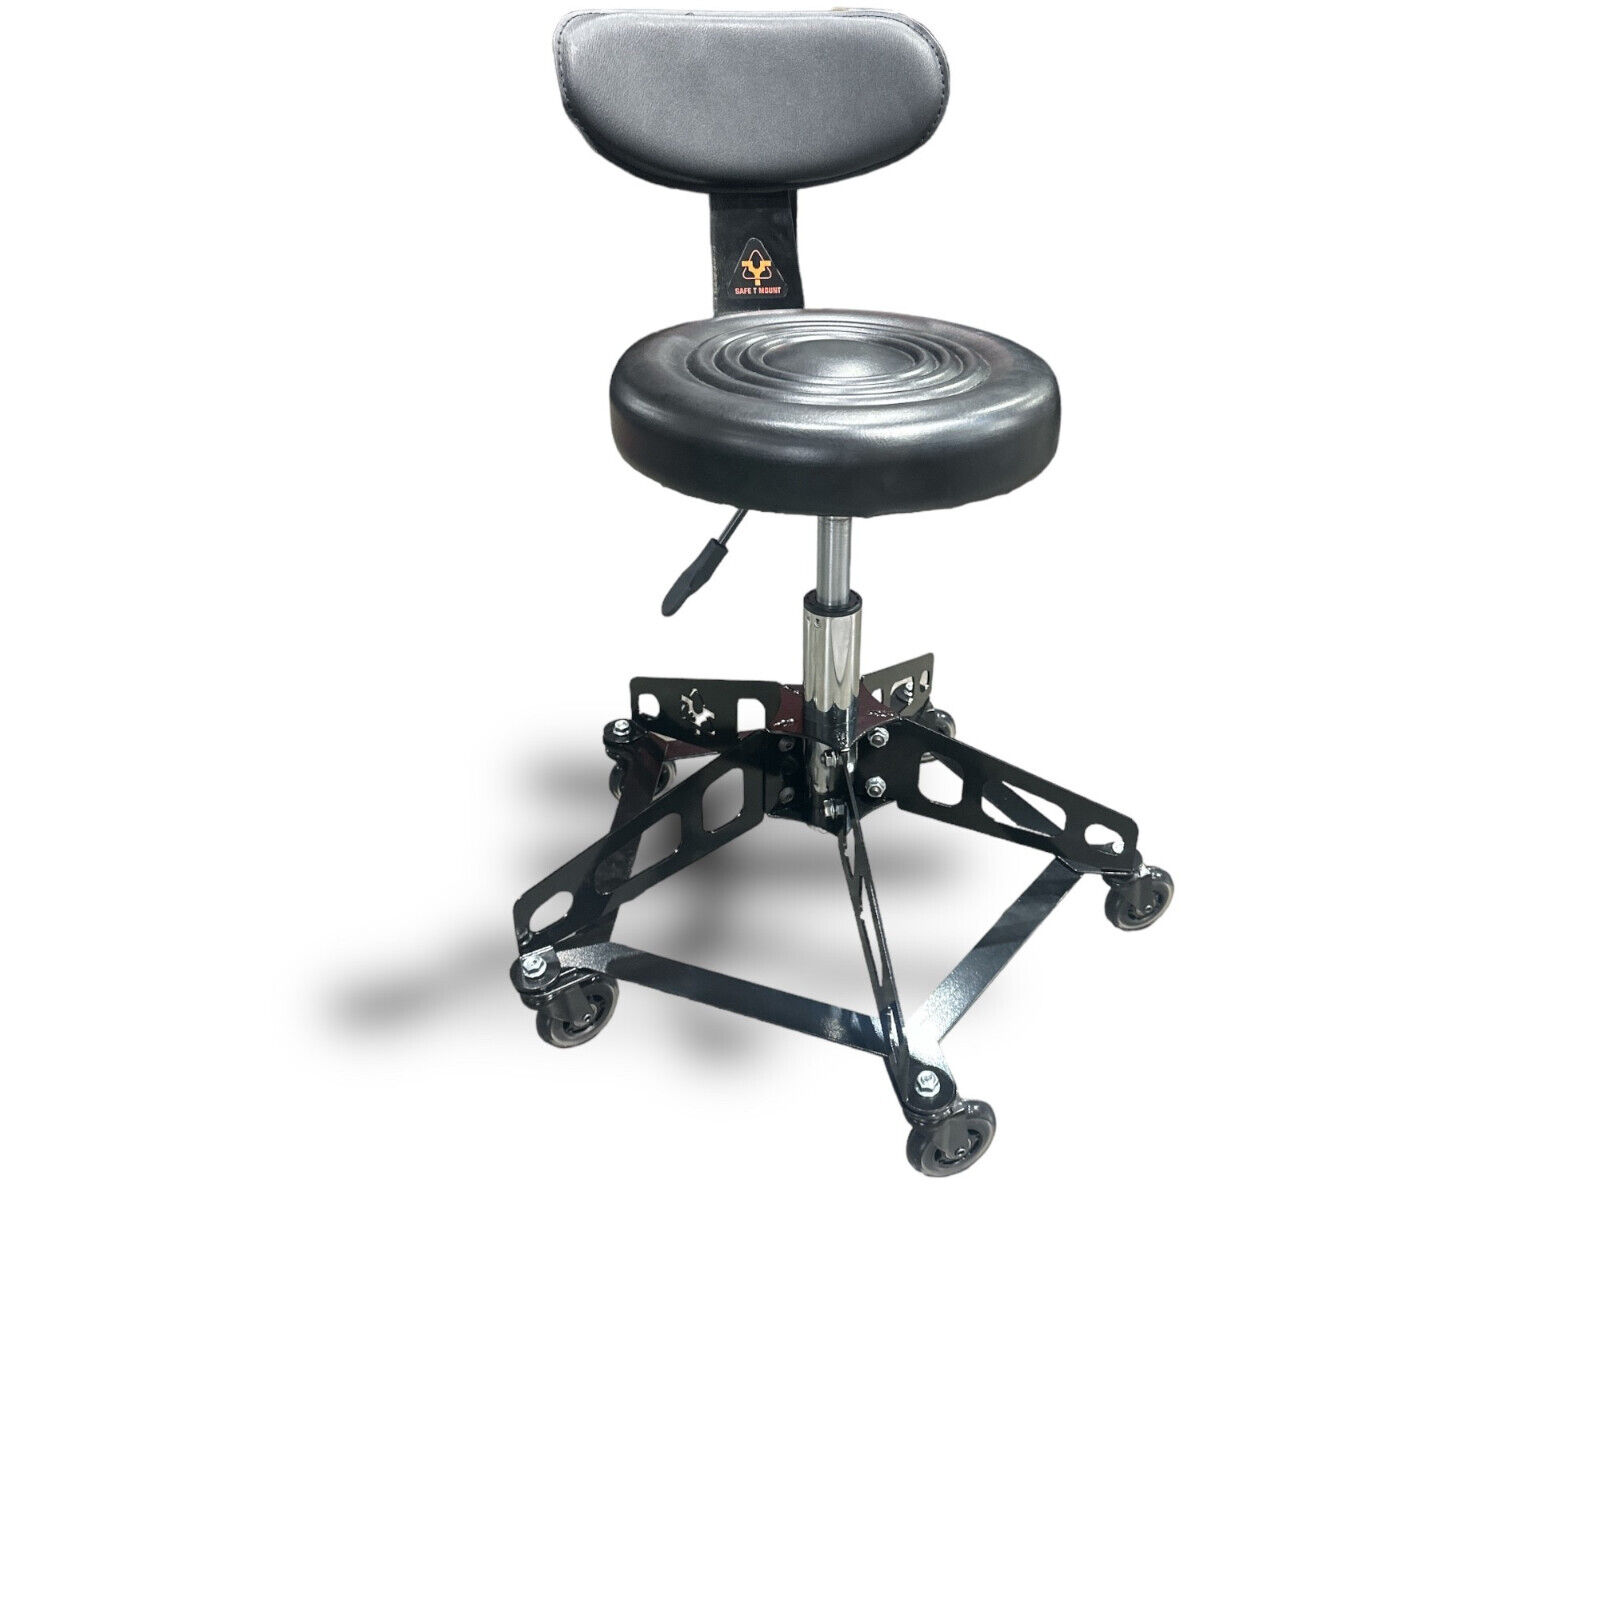 Safe T Mount Brand Fabricated Shop Stool-Vyper Style Chair